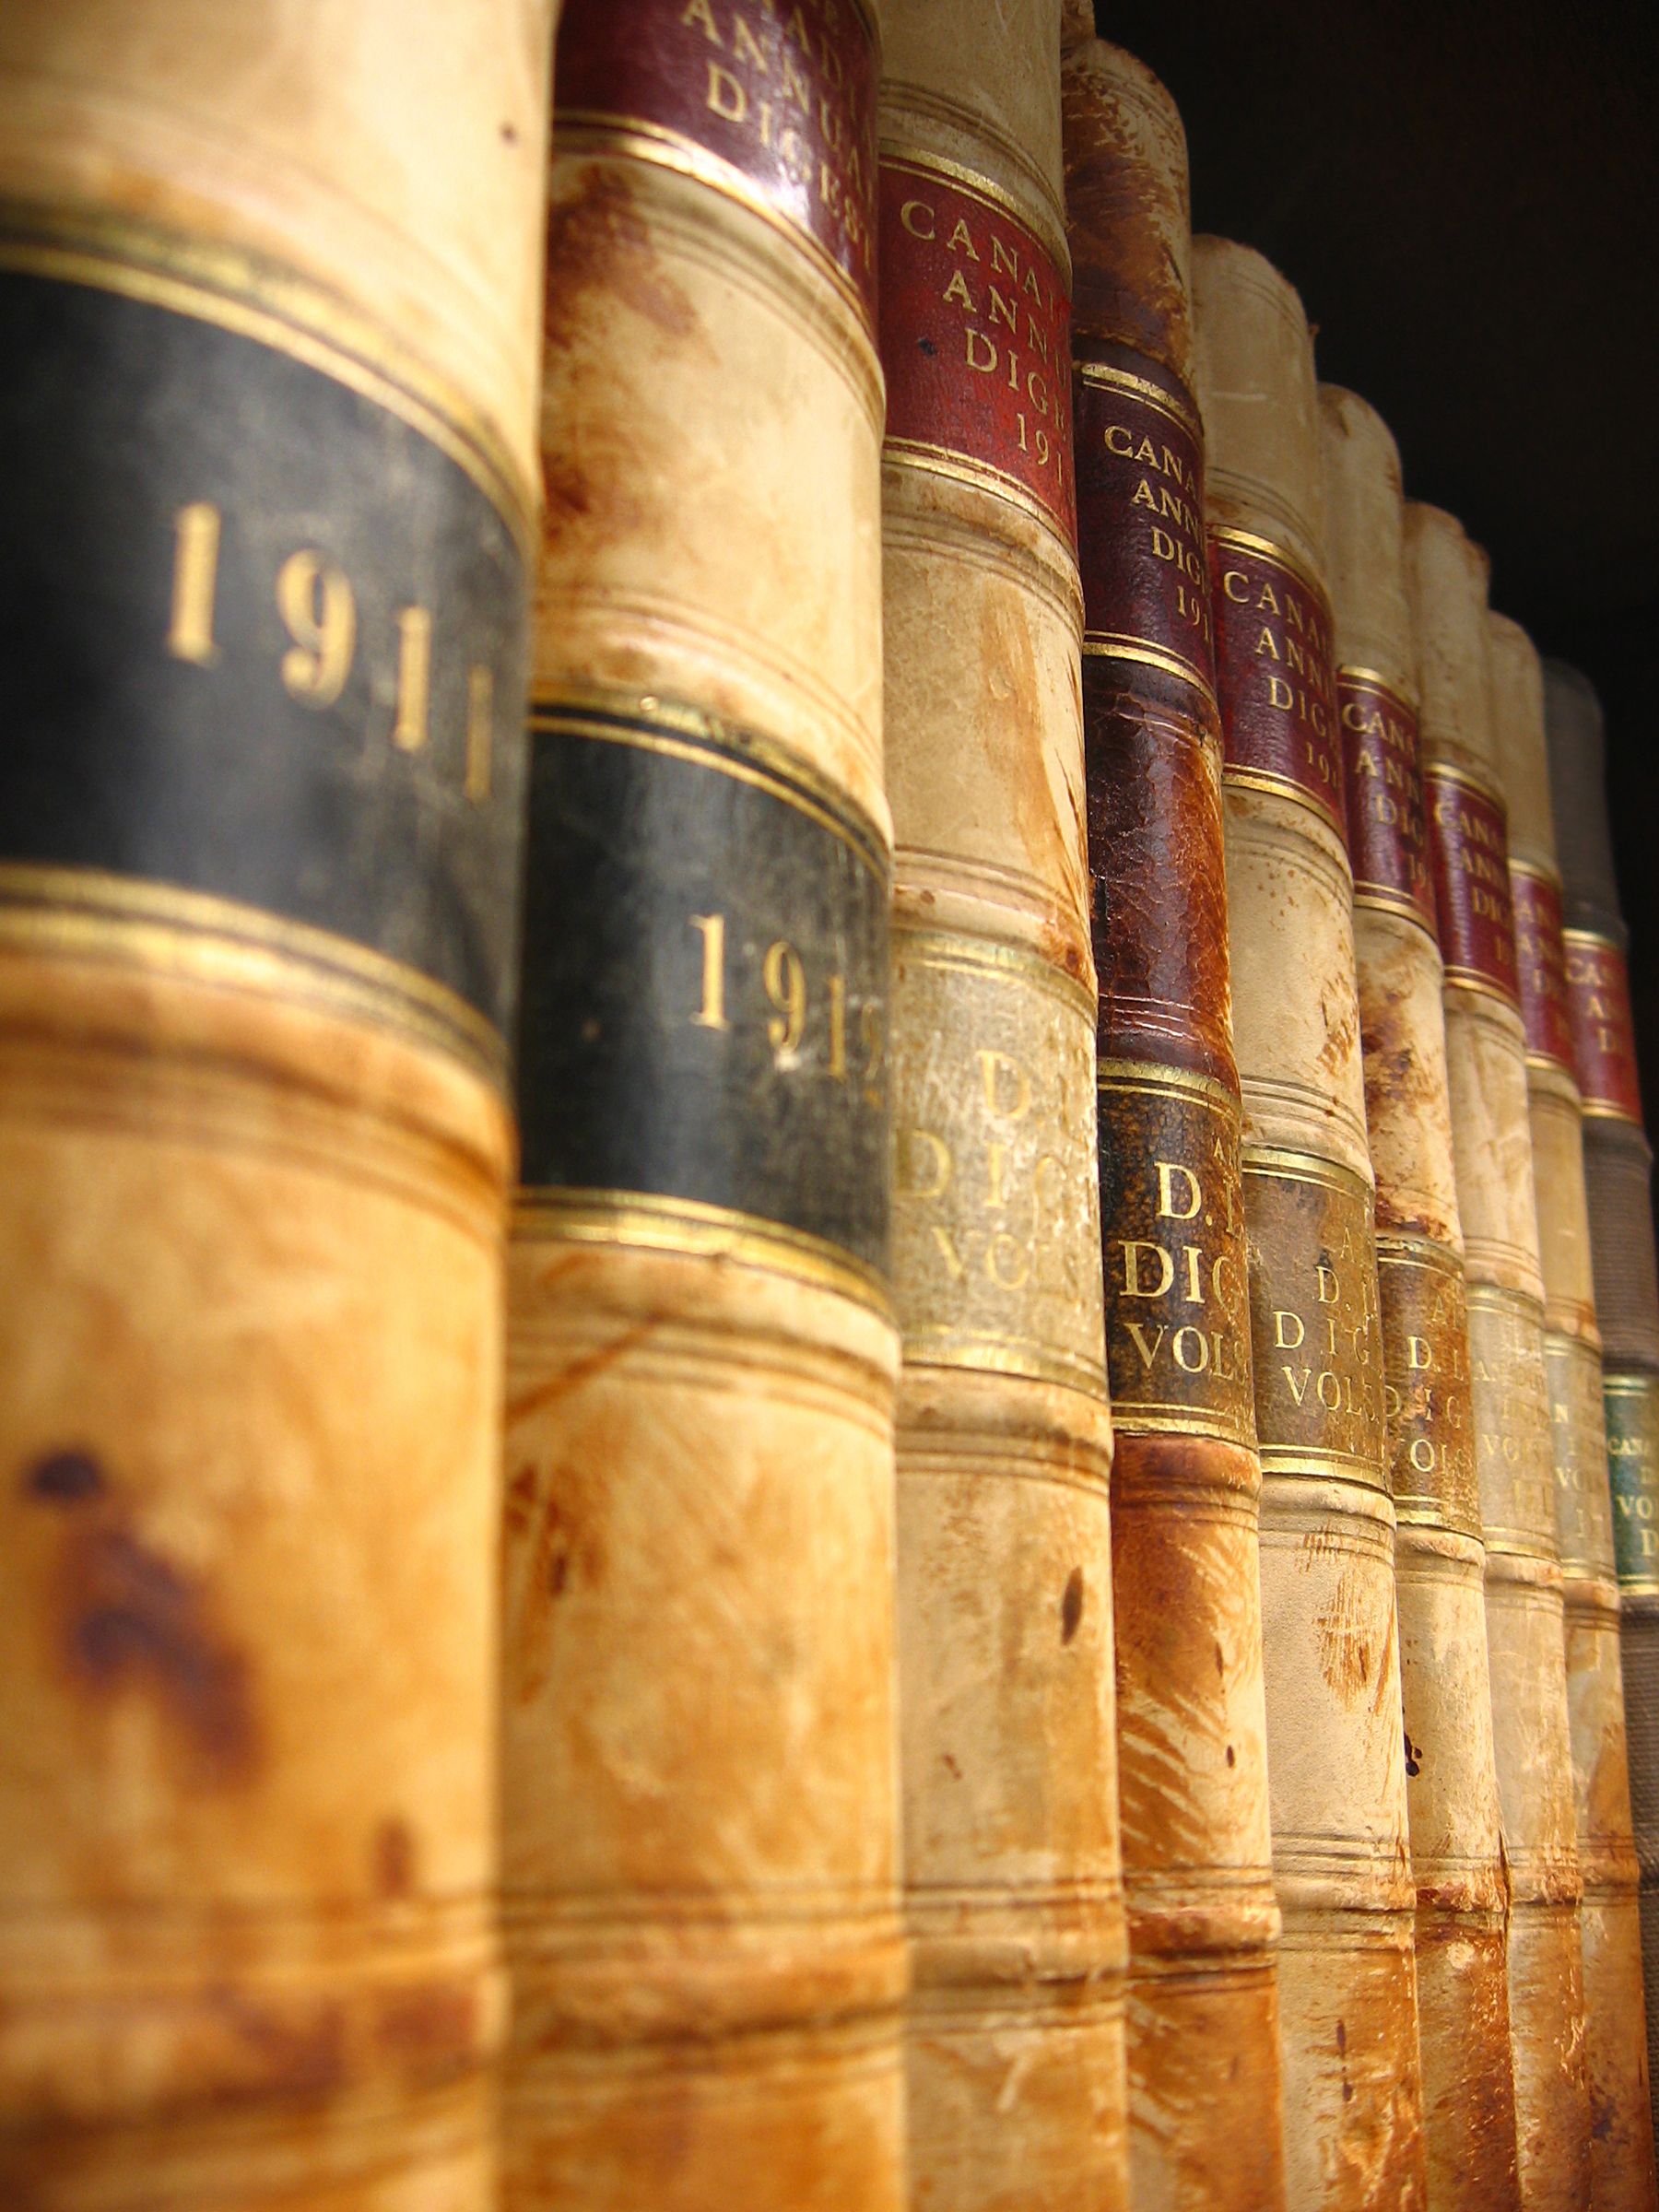 An image of a side image of 8 old law books